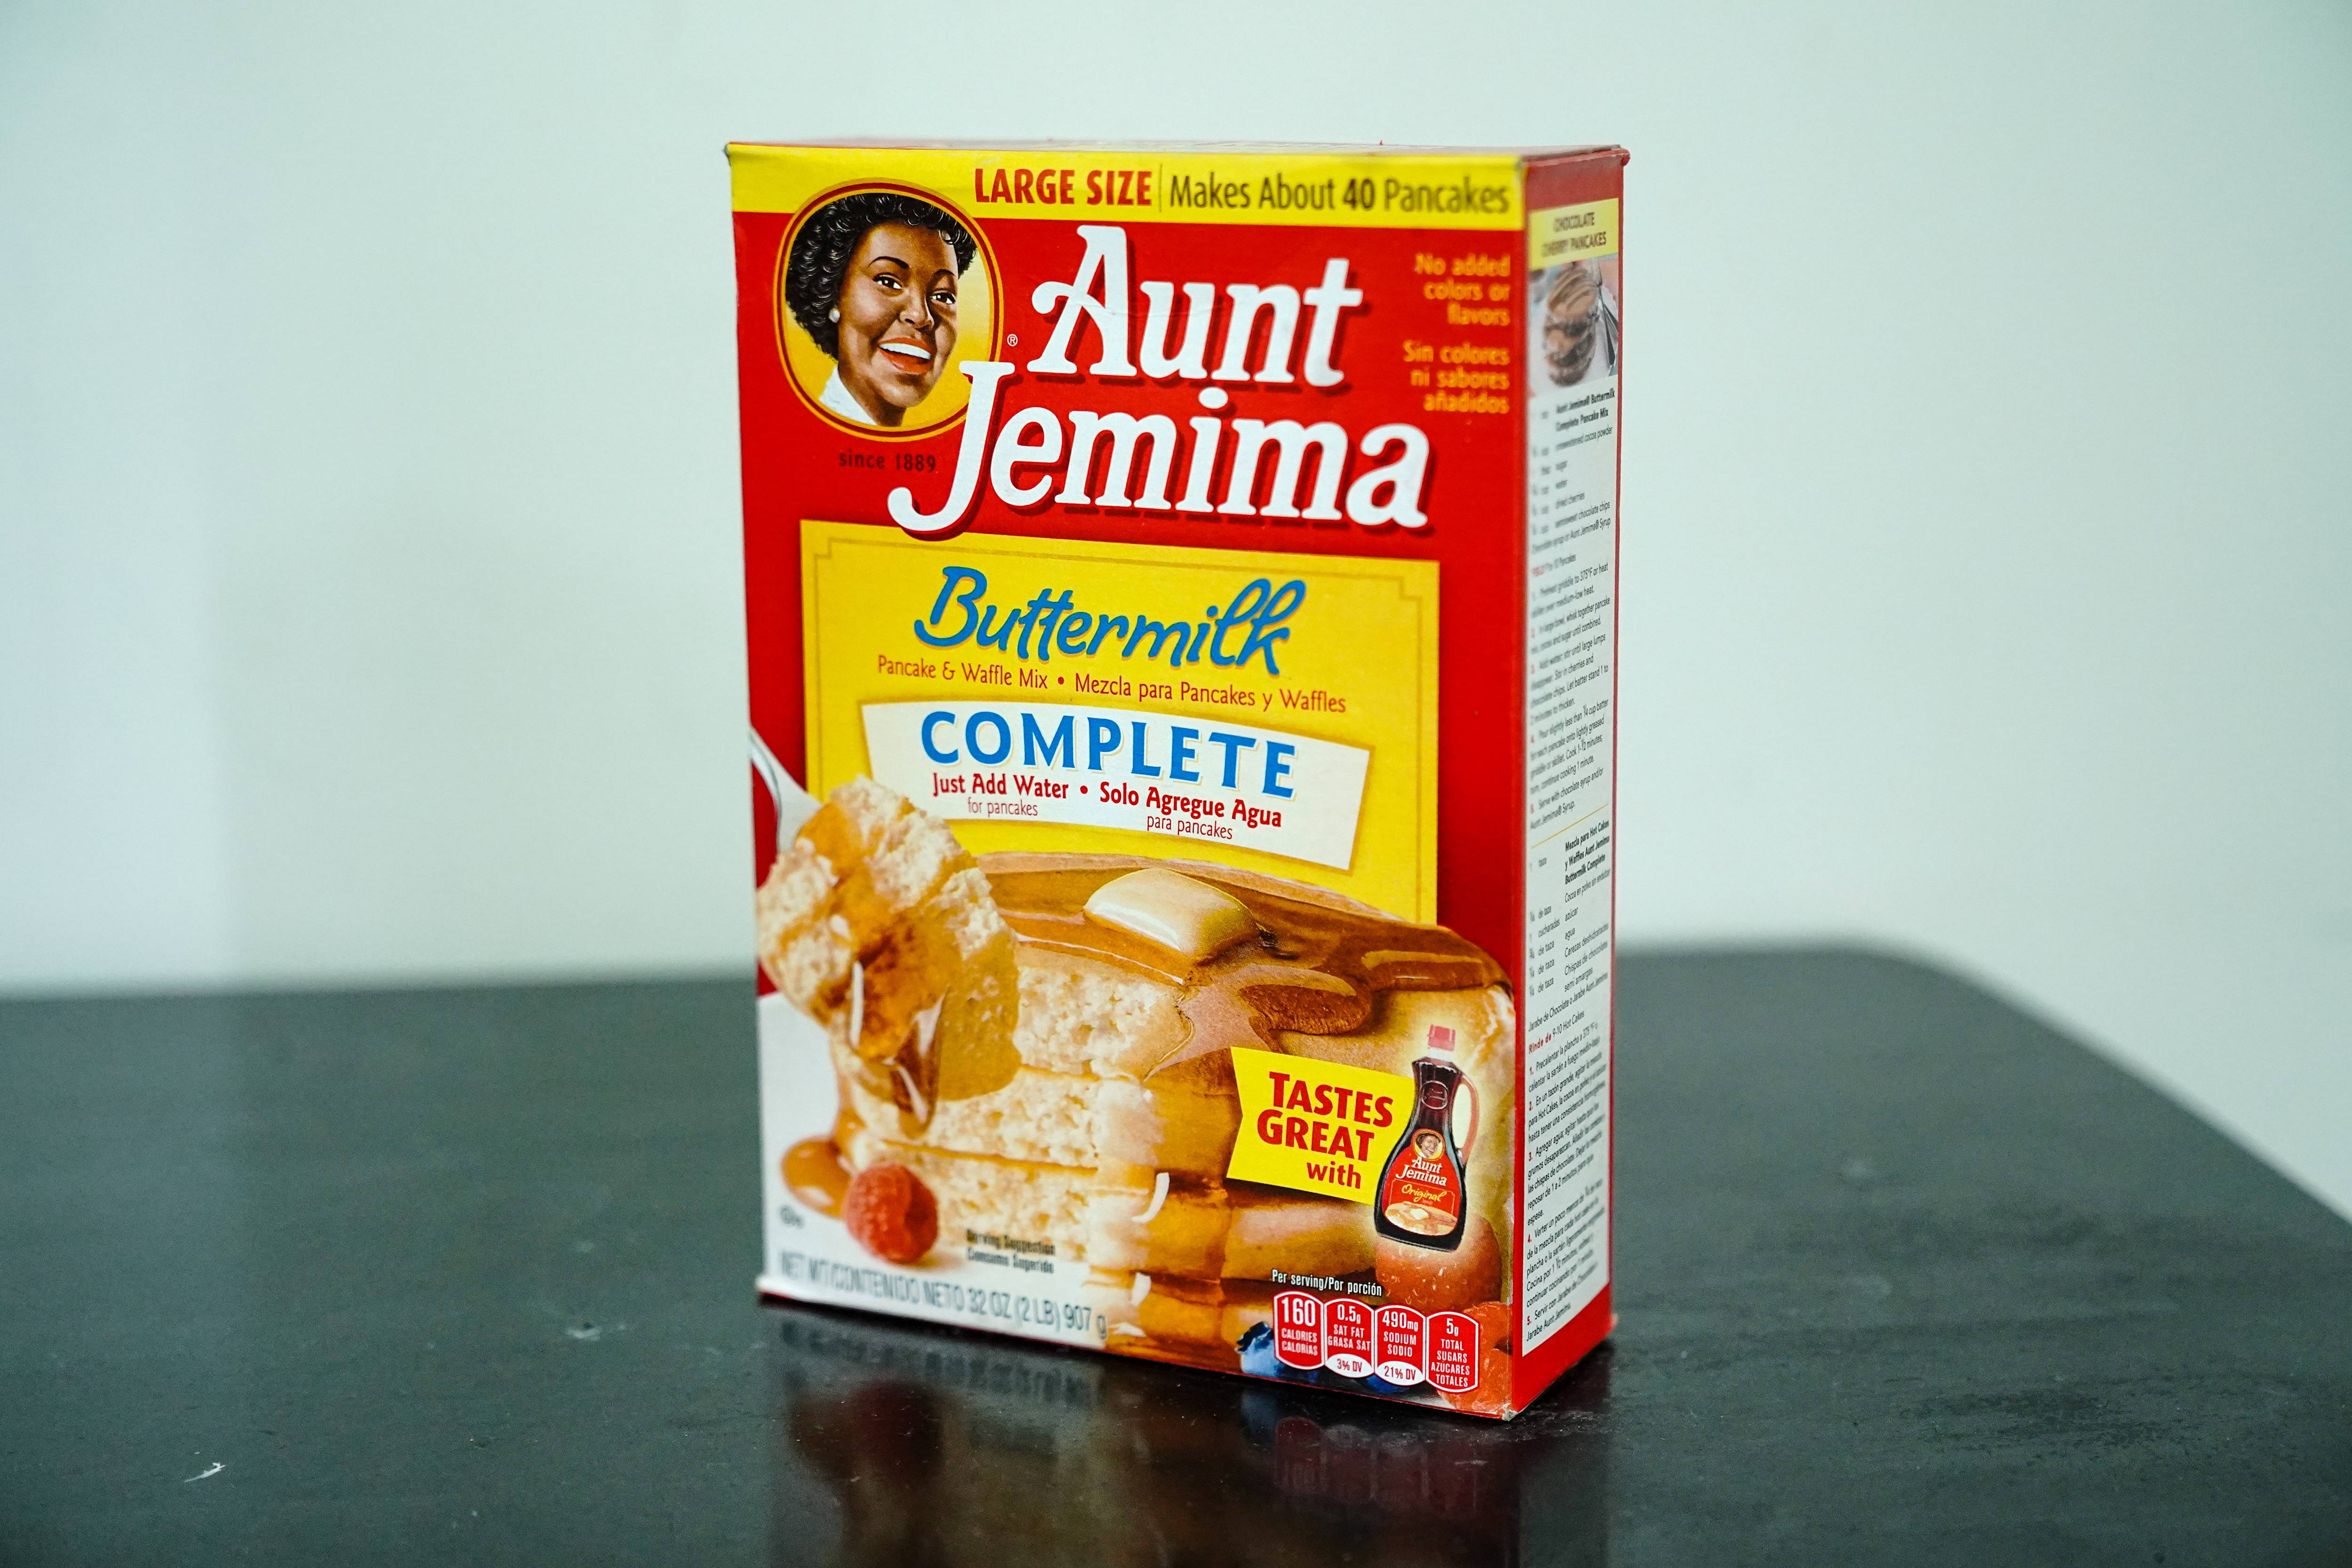 NEW YORK CITY, UNITED STATES - 2020/06/27: In this photo illustration an Aunt Jemima product seen on a table. The company is going to give its 130 year old Aunt Jemima brand a new look following complain saying that the logo is racist. The logo depict a black woman as a friendly servant. (Photo Illustration by John Nacion/SOPA Images/LightRocket via Getty Images)